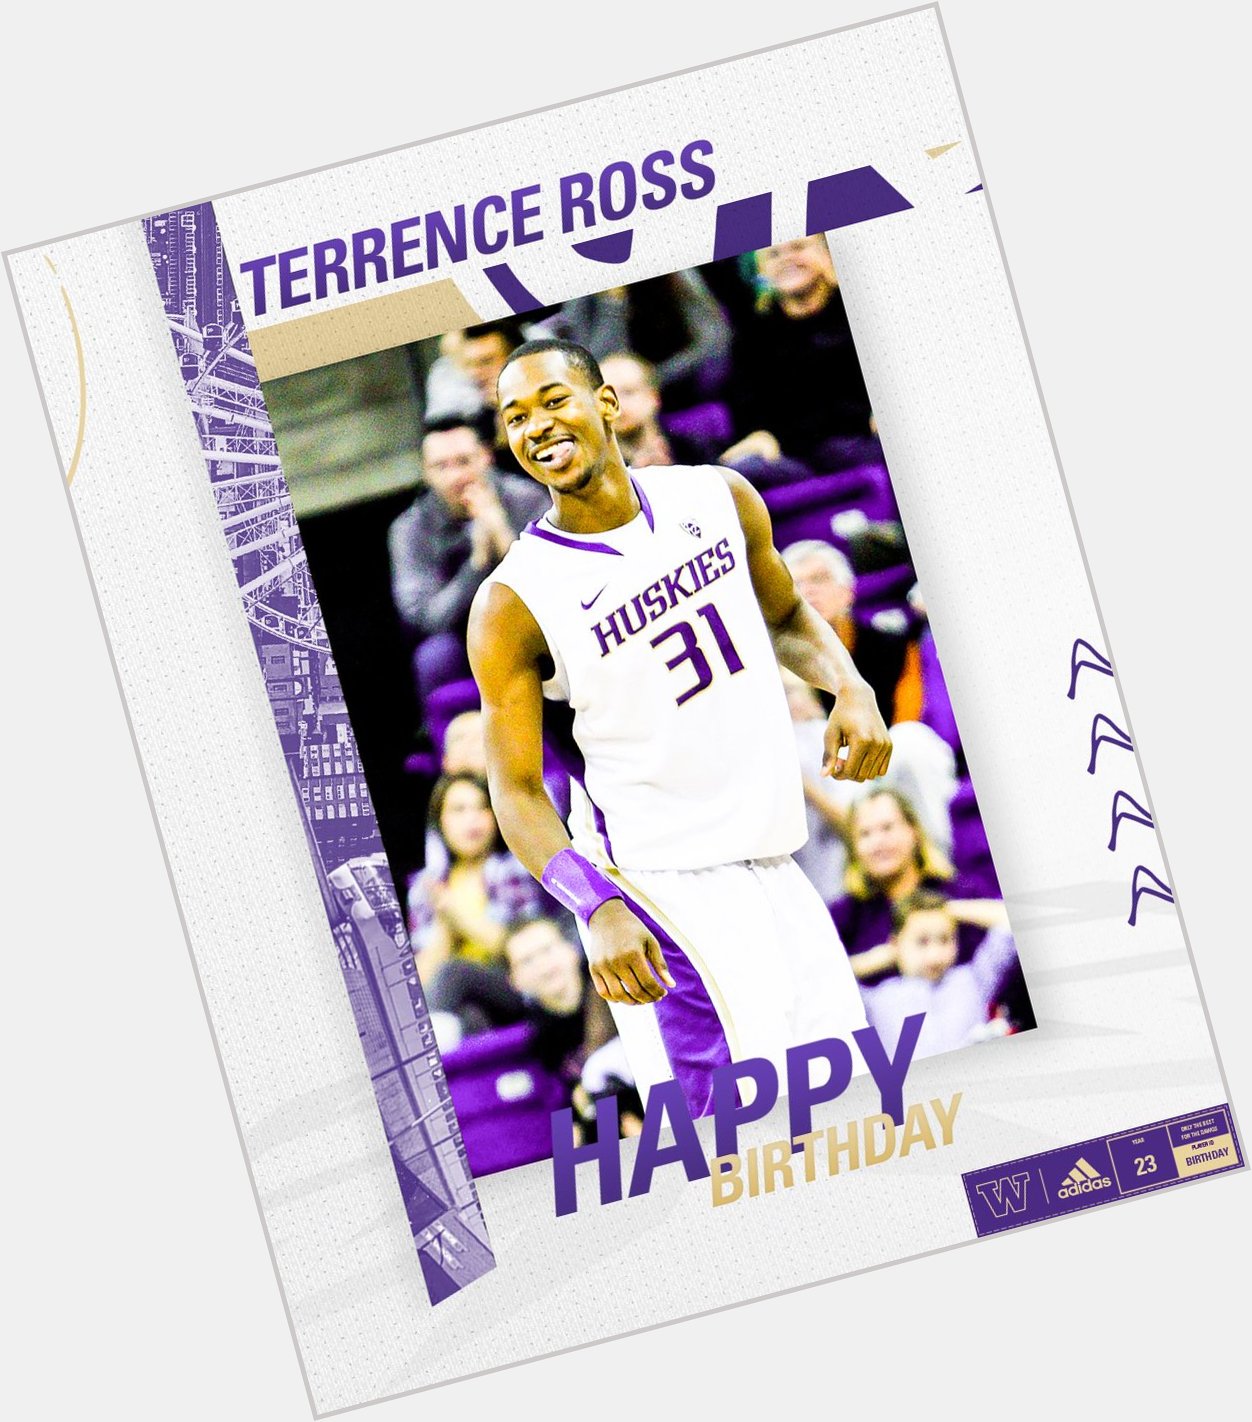 Happy Birthday to one of our Terrence Ross!  